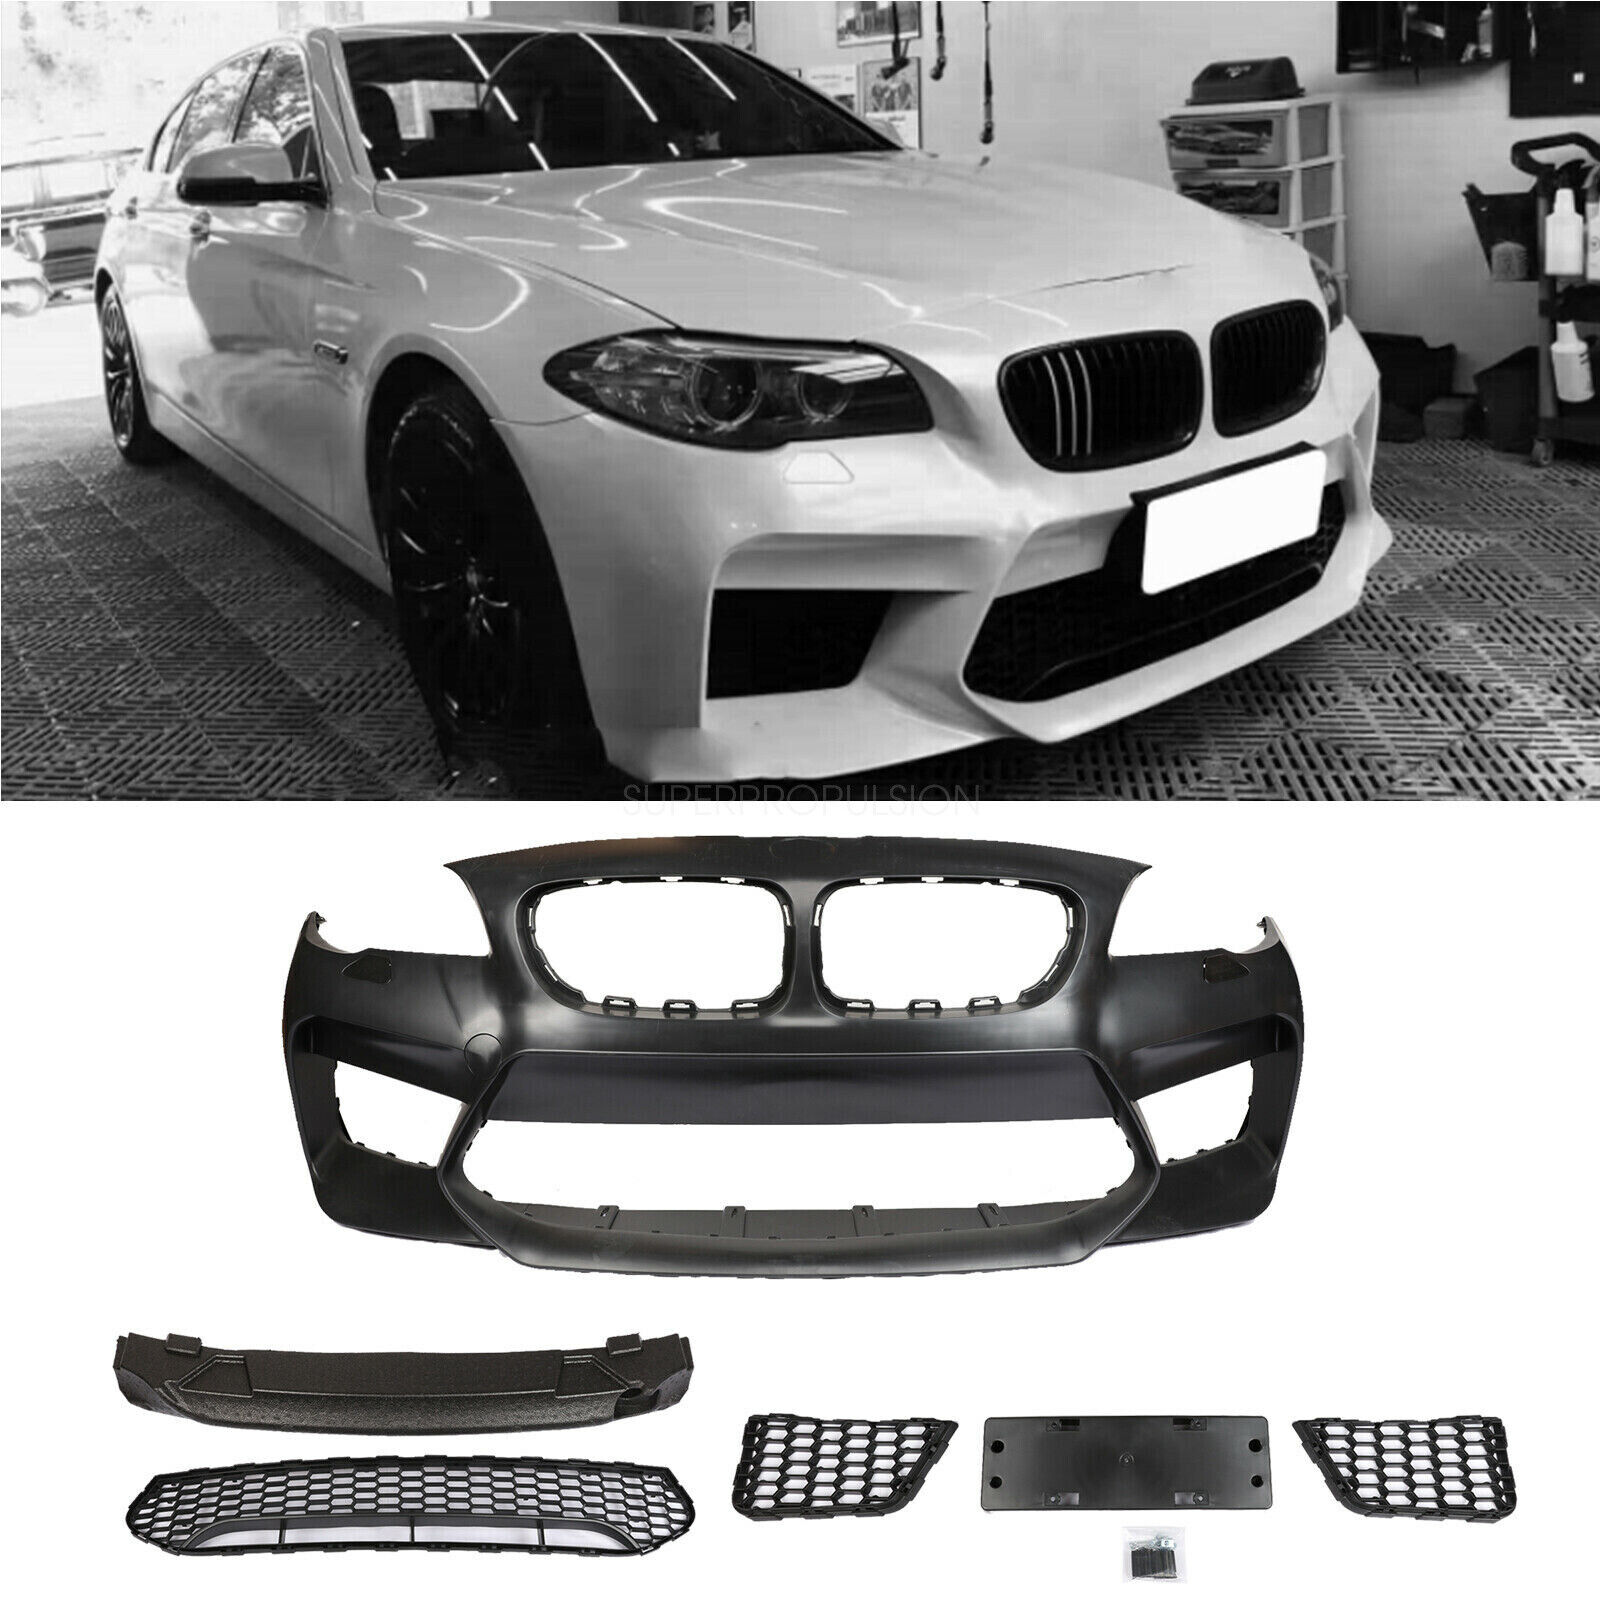 G30 M5 Look style Front Bumper fit for BMW 5 Series F10 M5 style 11-17 W/O PDC